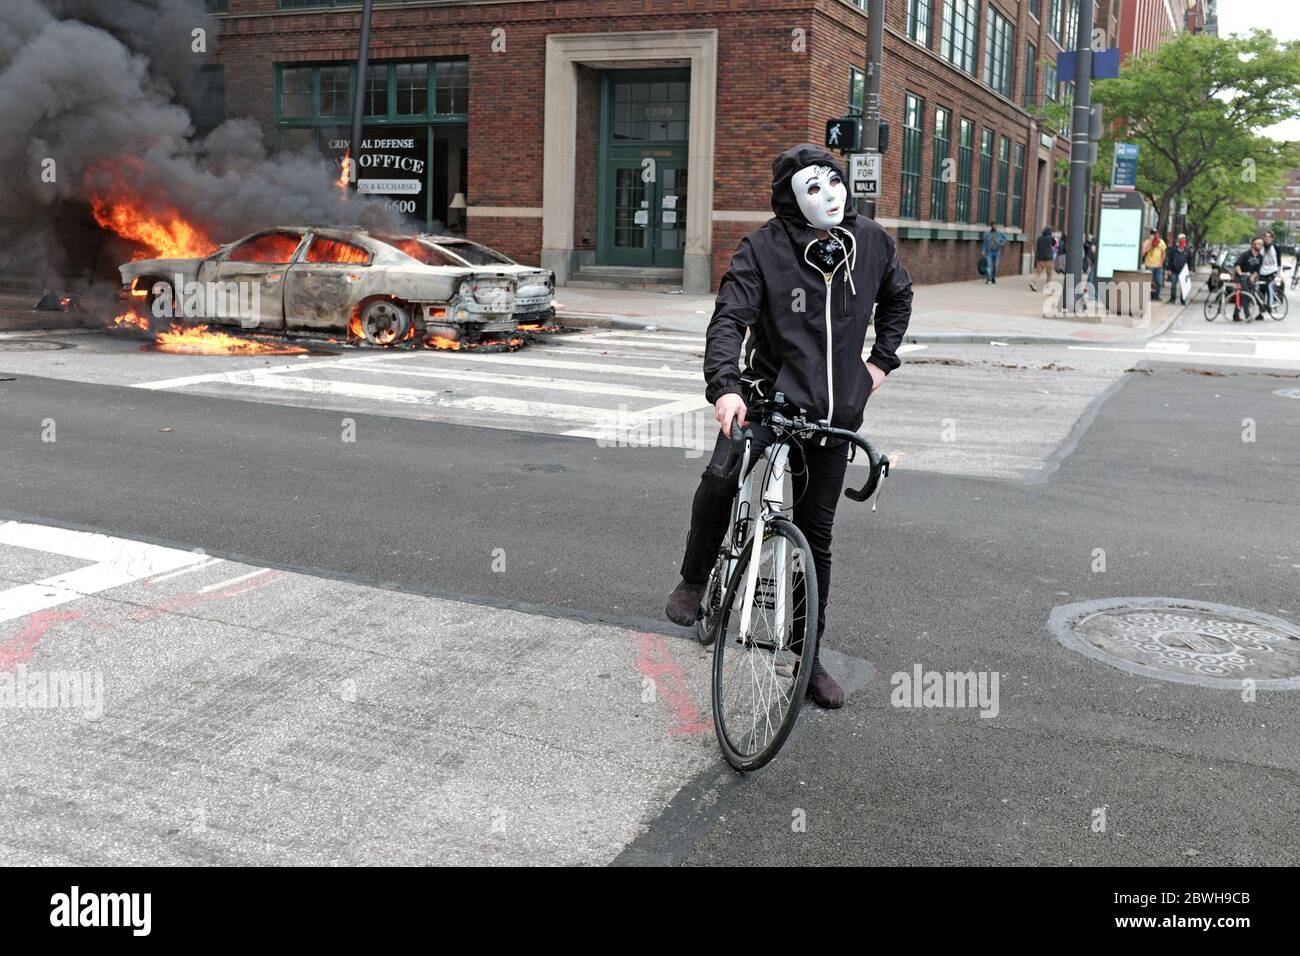 A protester with a Guy Fawkes mask rests on his bike in front of burning police cars in downtown Cleveland, Ohio during the George Floyd protest. Stock Photo